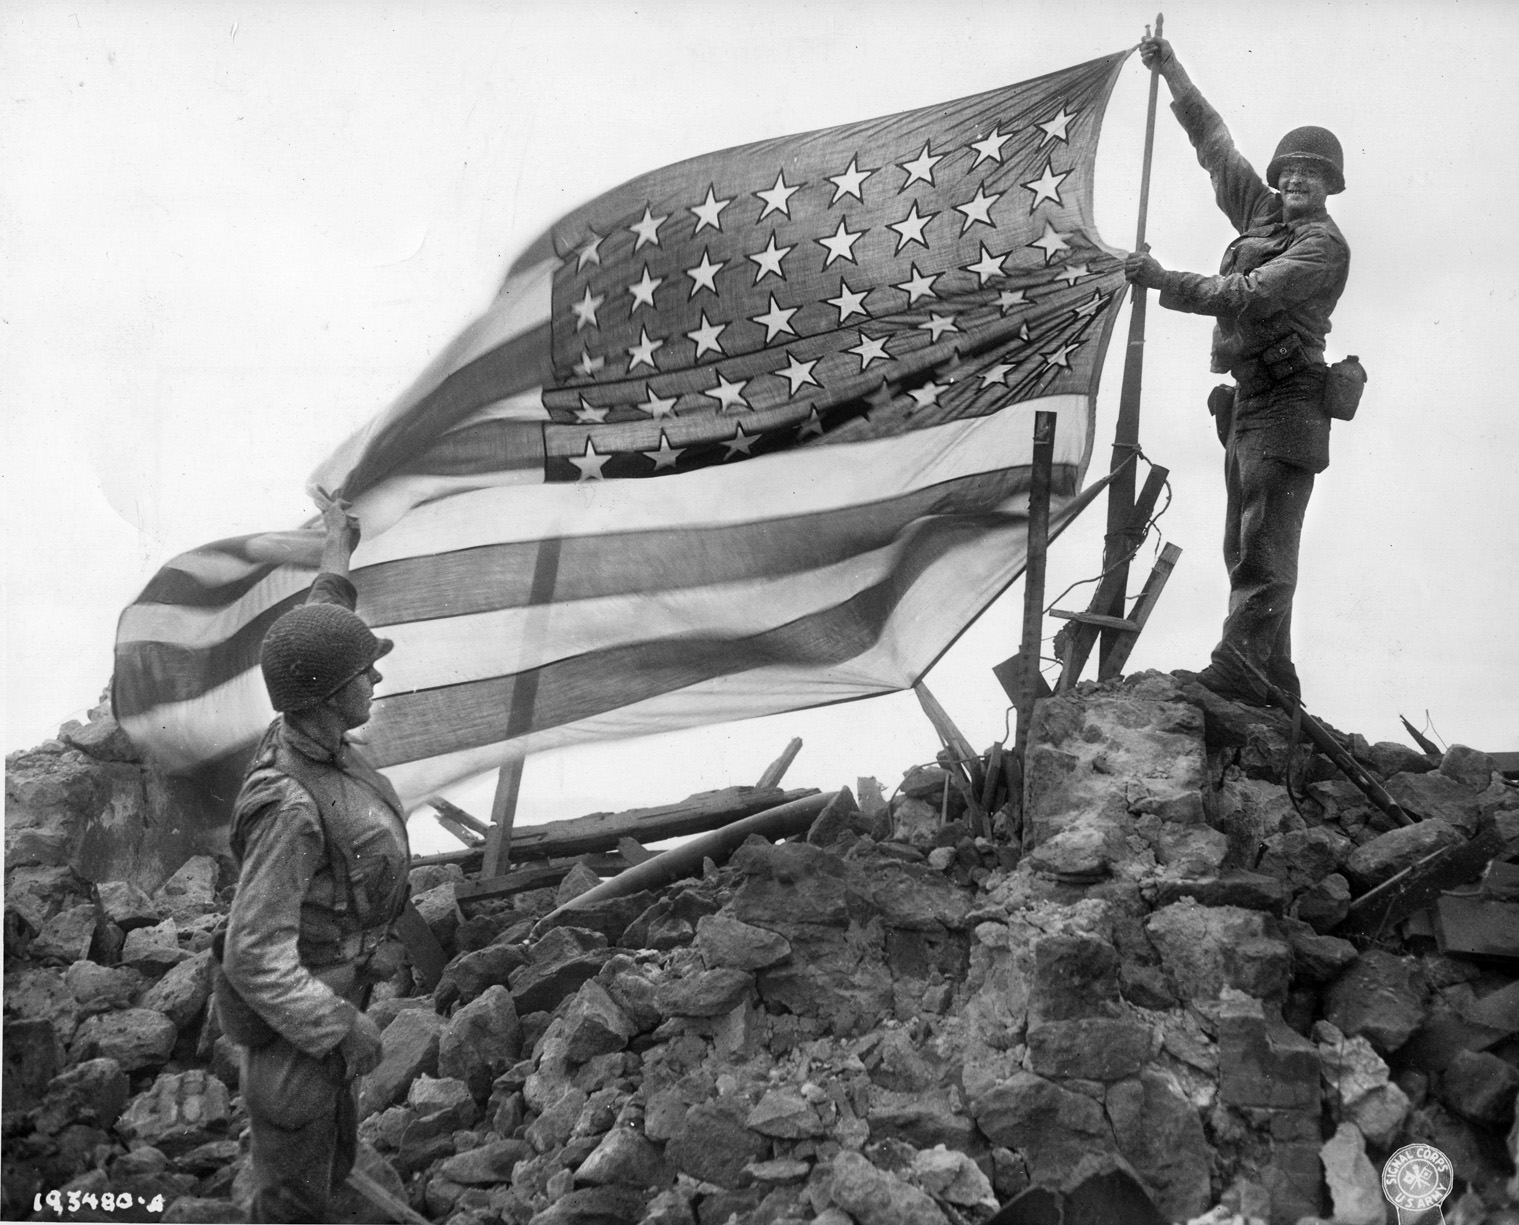 After the German garrison on the island of Cezembre has surrendered, soldiers of the U.S. 83rd Infantry Division raise the American flag in triumph. The island is located near the French city of St. Malo, where troops of the 83rd Division were also engaged.